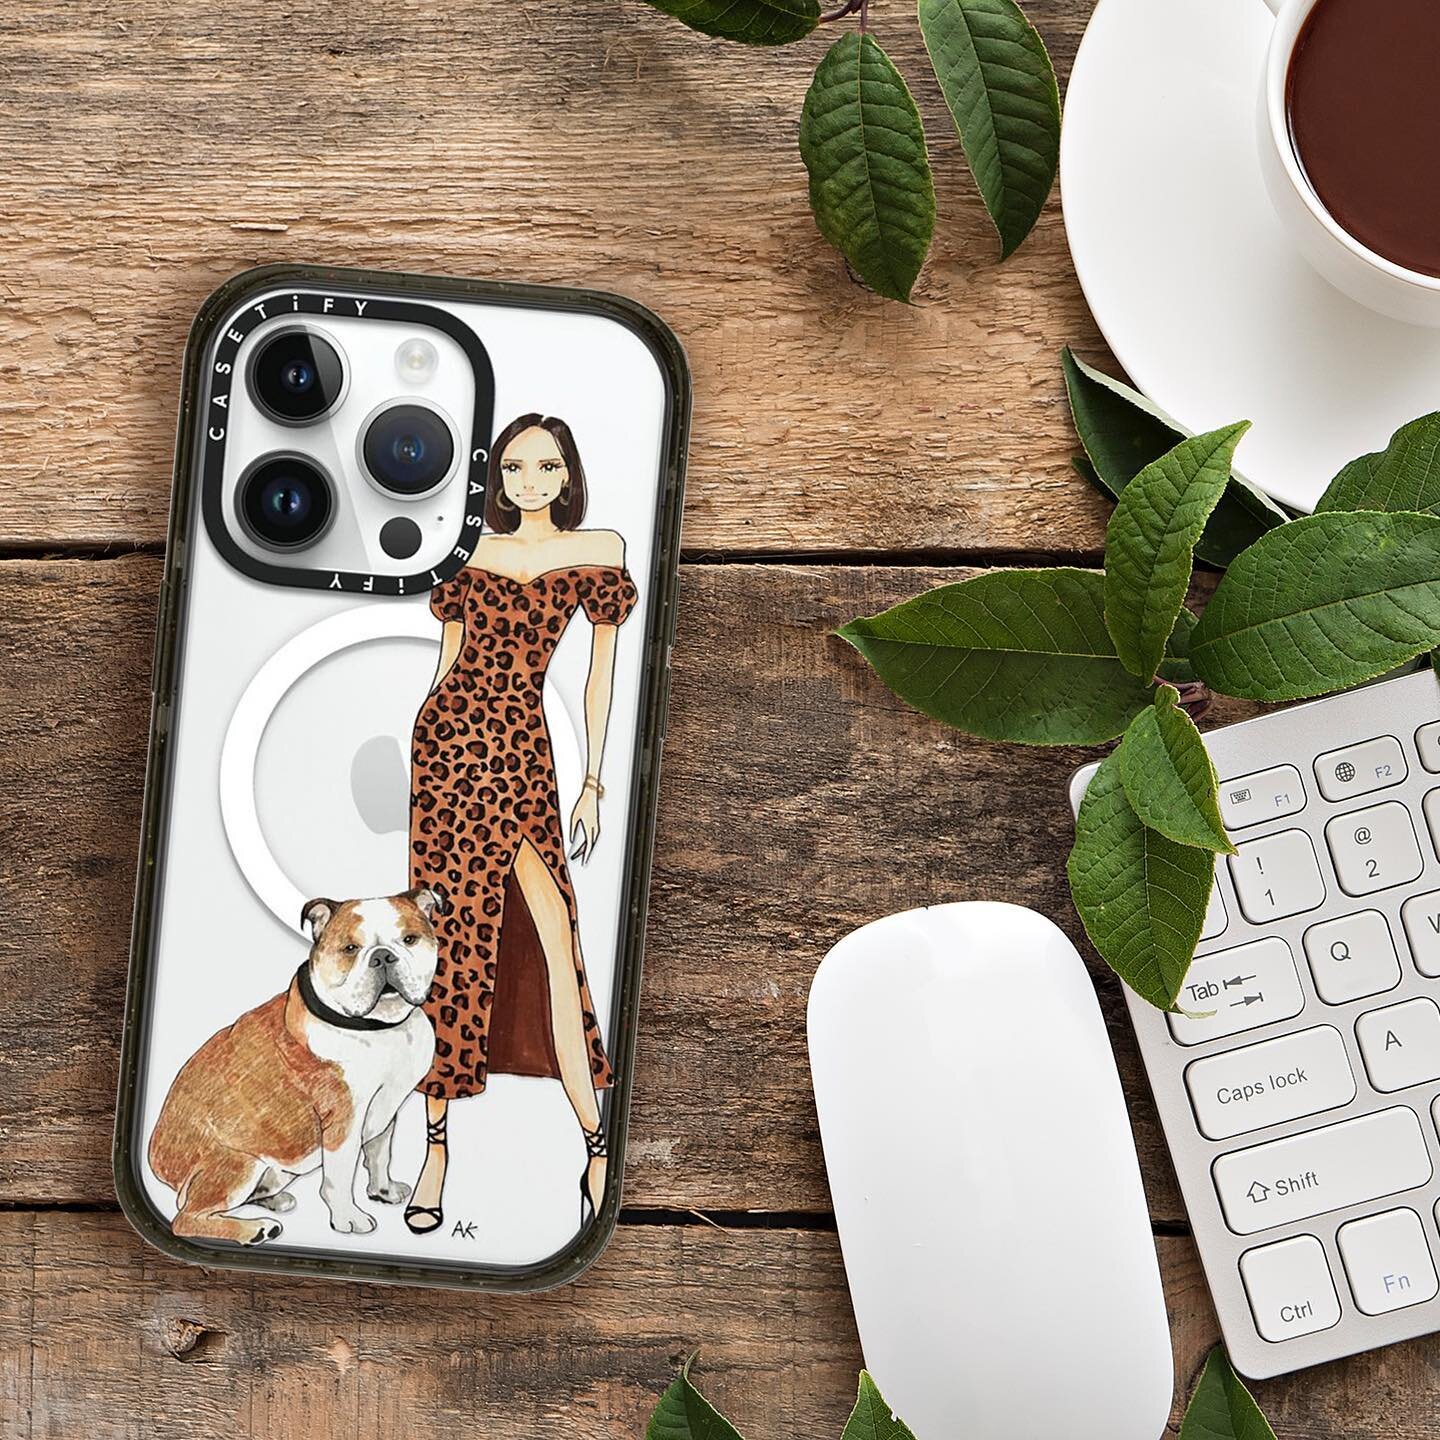 New phone case designs are available on @casetify ❤︎ 
Do you want to have a custom phone case of you and your pet? I&rsquo;ve been asked many times if I take a custom order and I decided to try for a limited time. DM me if you&rsquo;re interested! #c